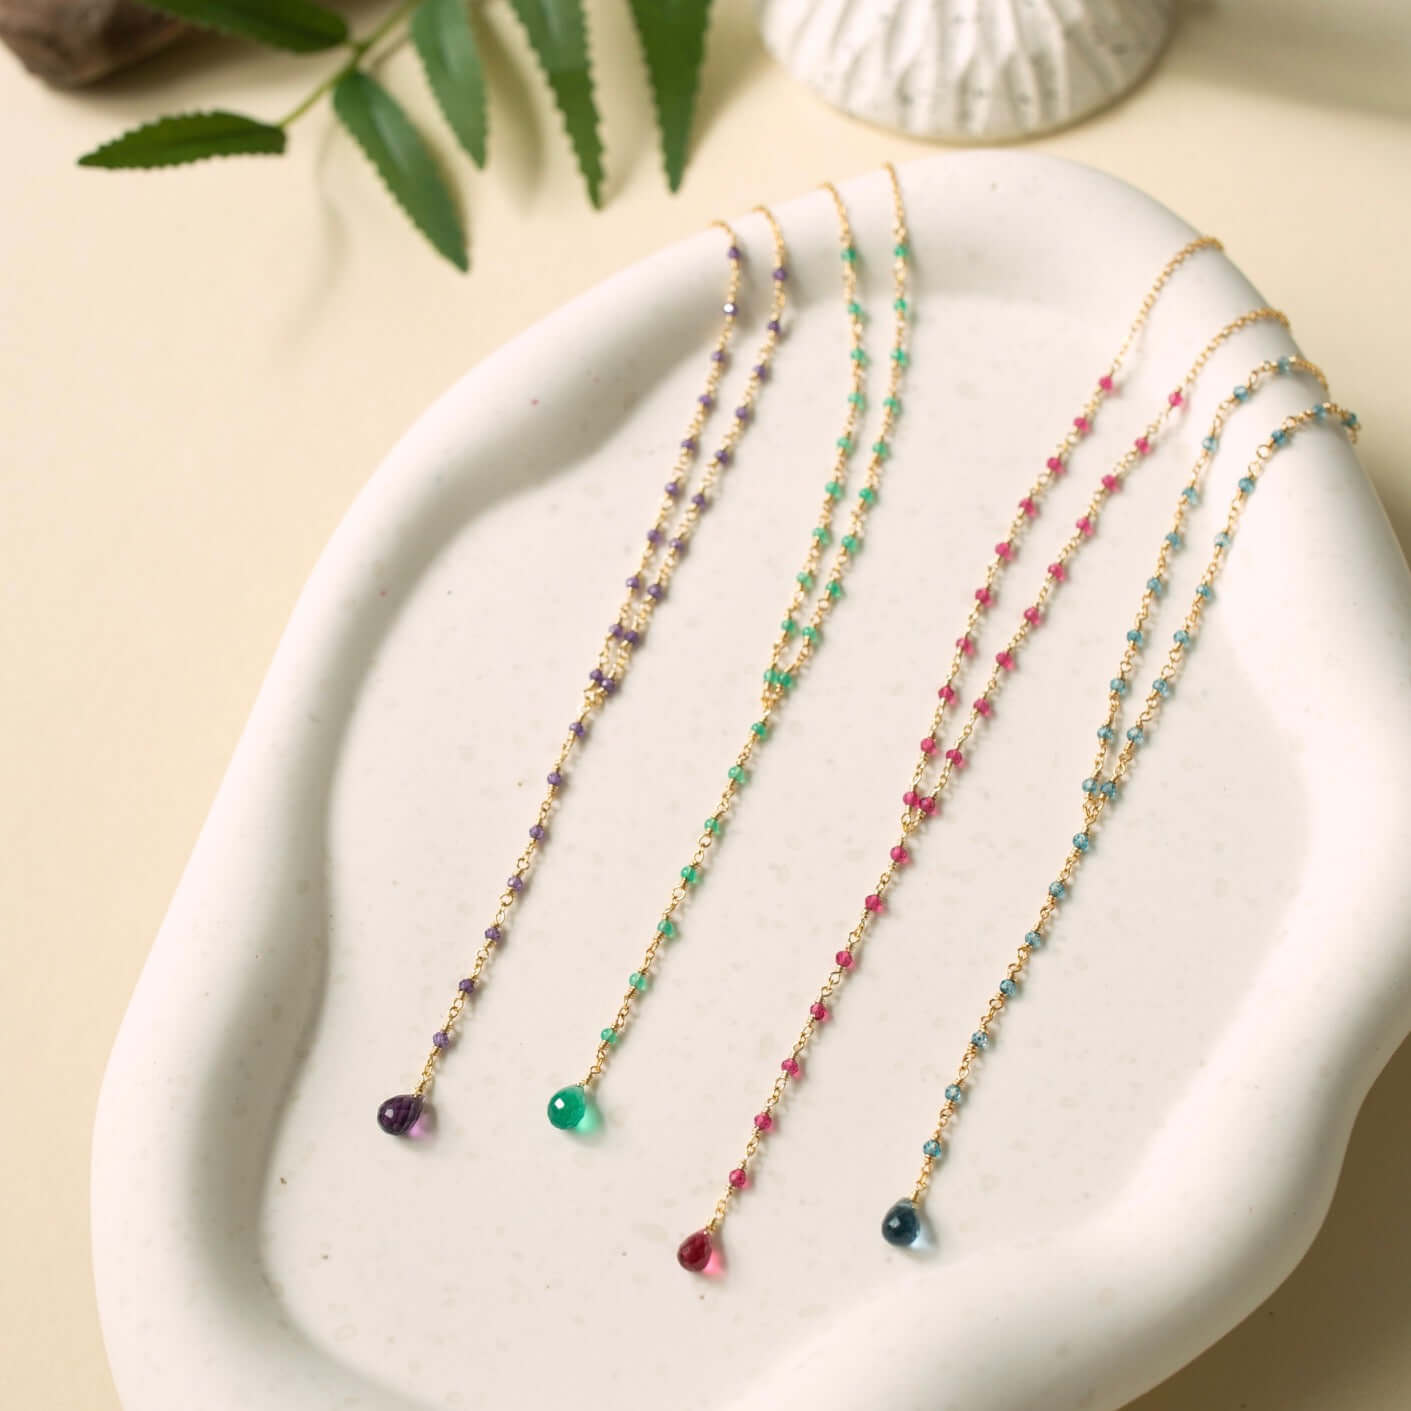 Amethyst, green onyx, pink tourmaline quartz, and lolite gemstones arranged on a white clay plate